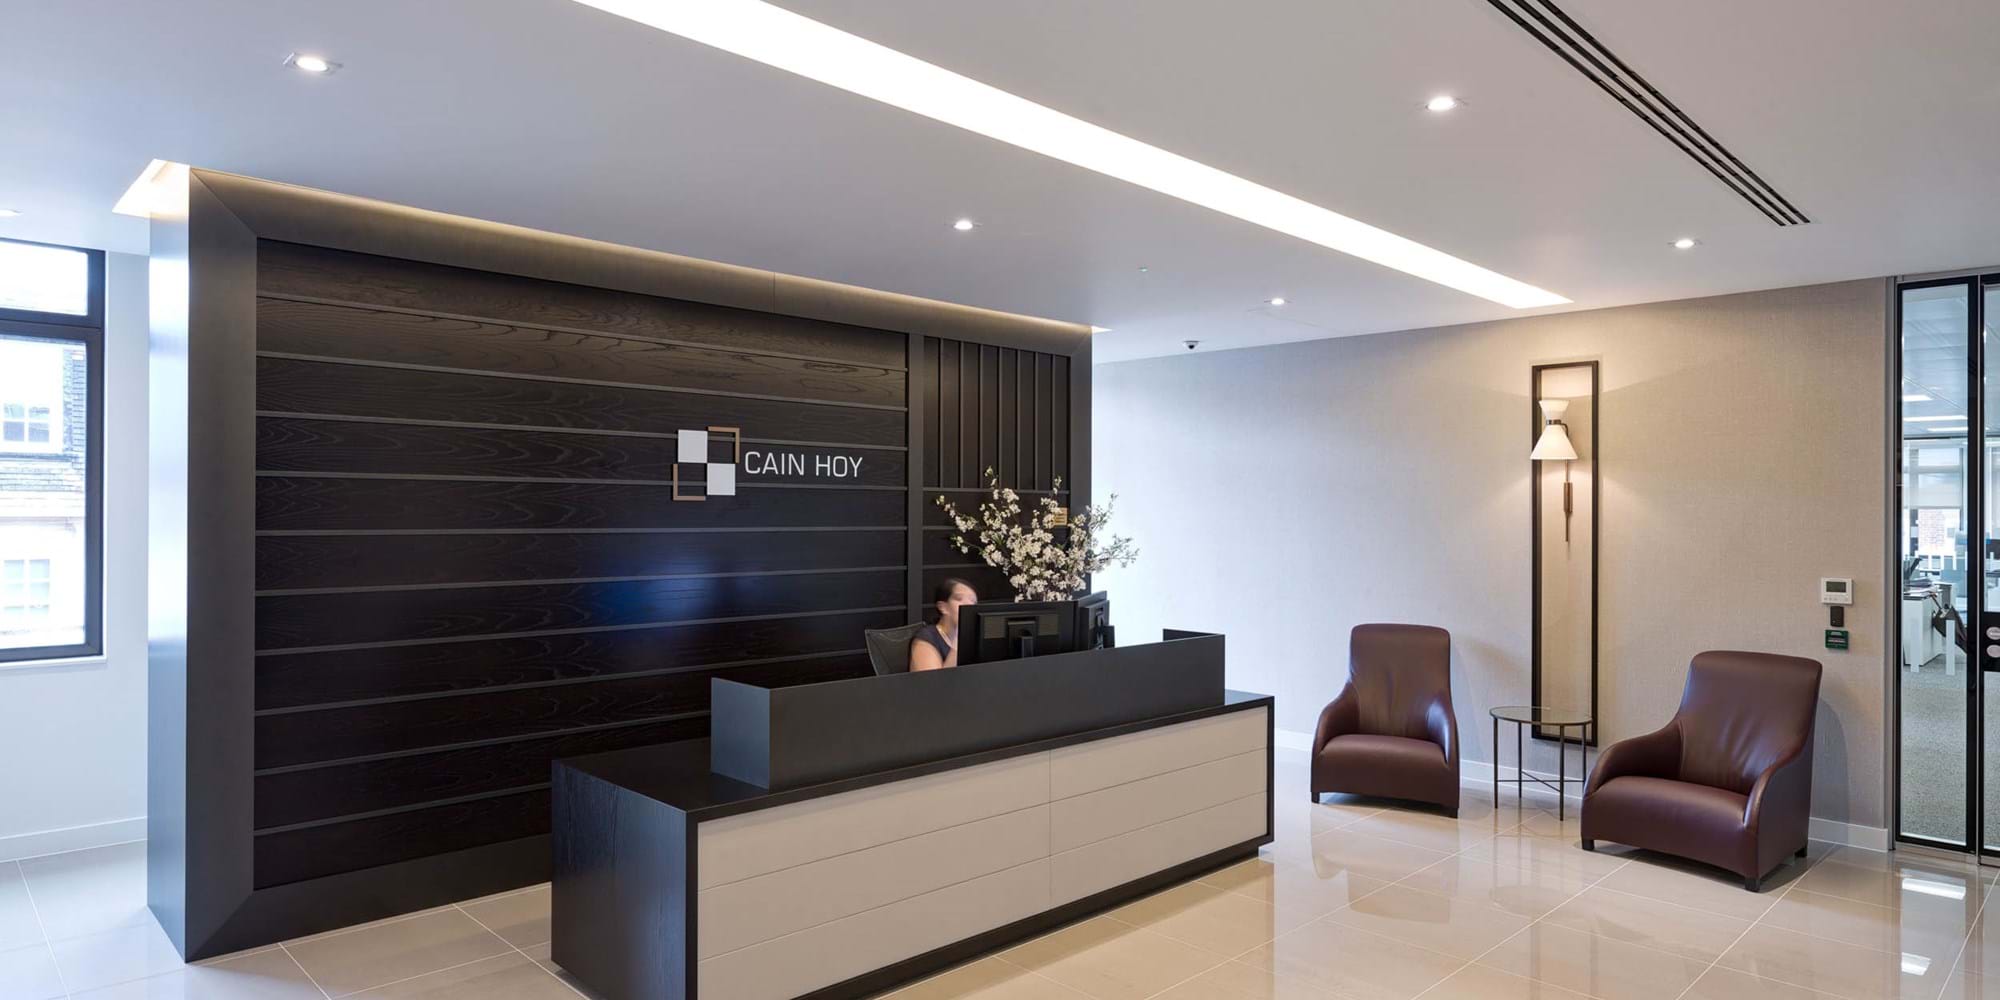 Modus Workspace office design, fit out and refurbishment - Cain Hoy - Reception - Cain Hoy 02 web site.jpg